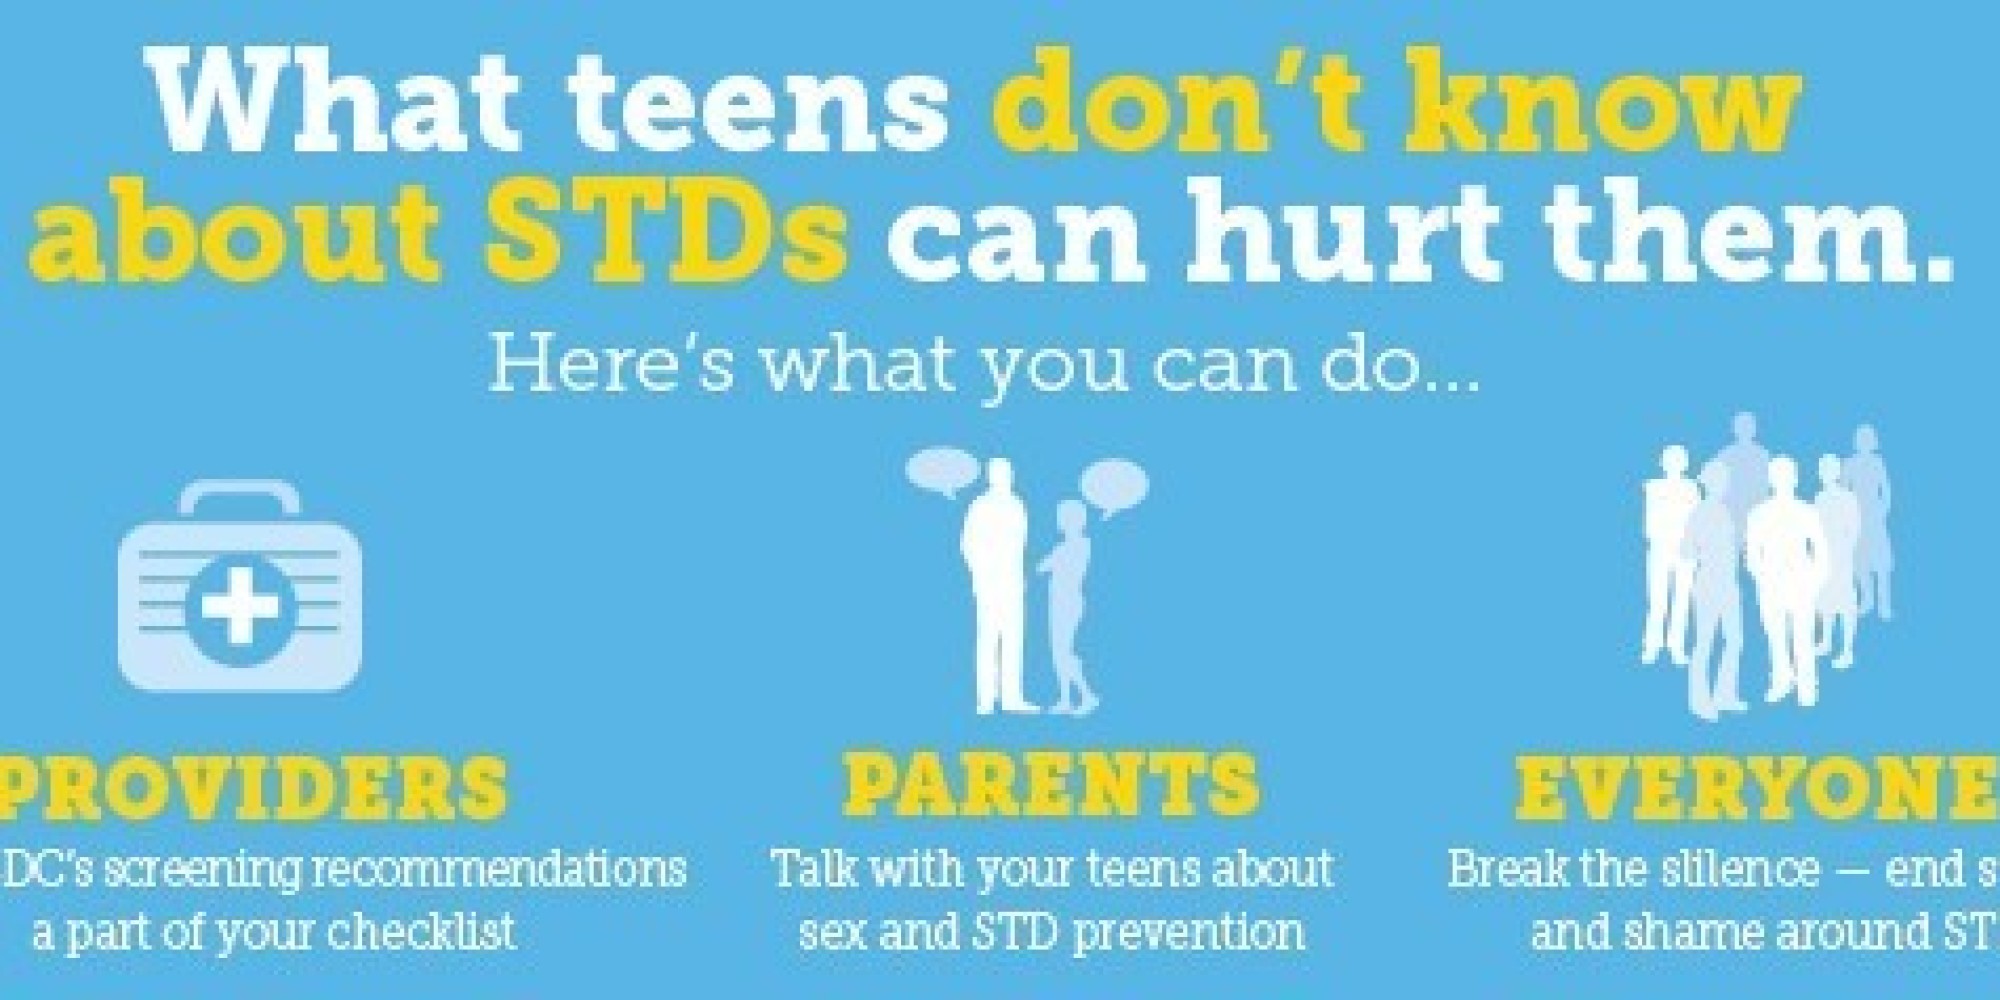 The problem of sexually transmitted diseases among todays youth